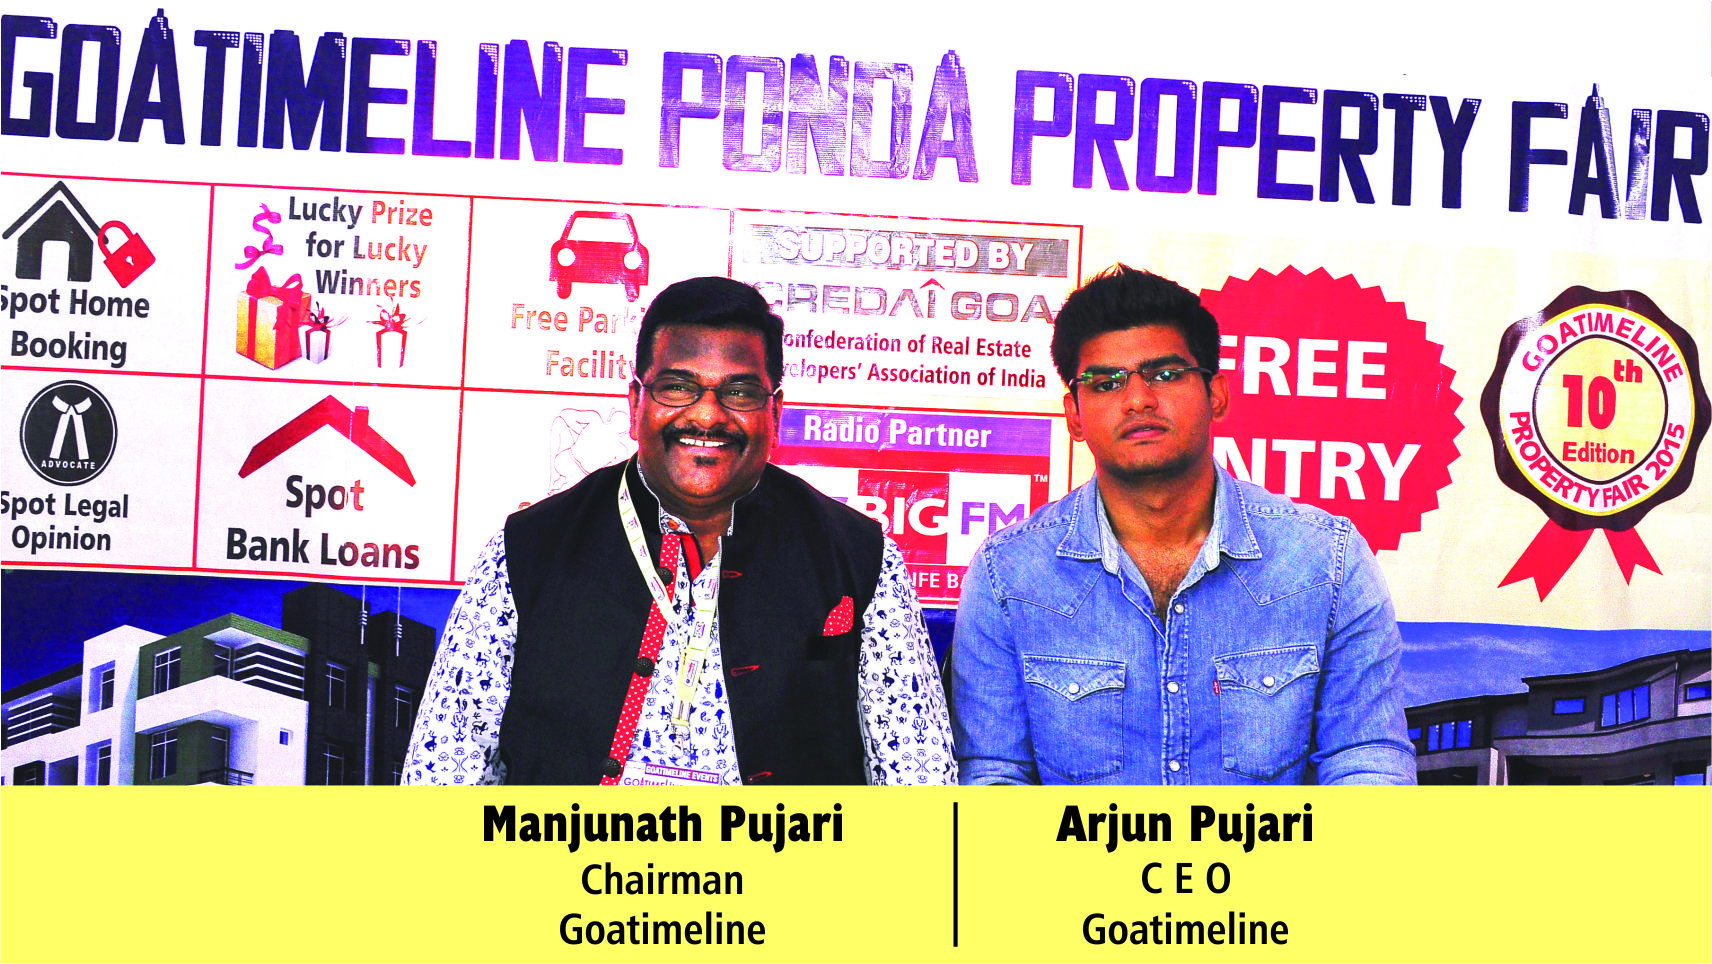 You are currently viewing Goa timeline Ponda Property Fair